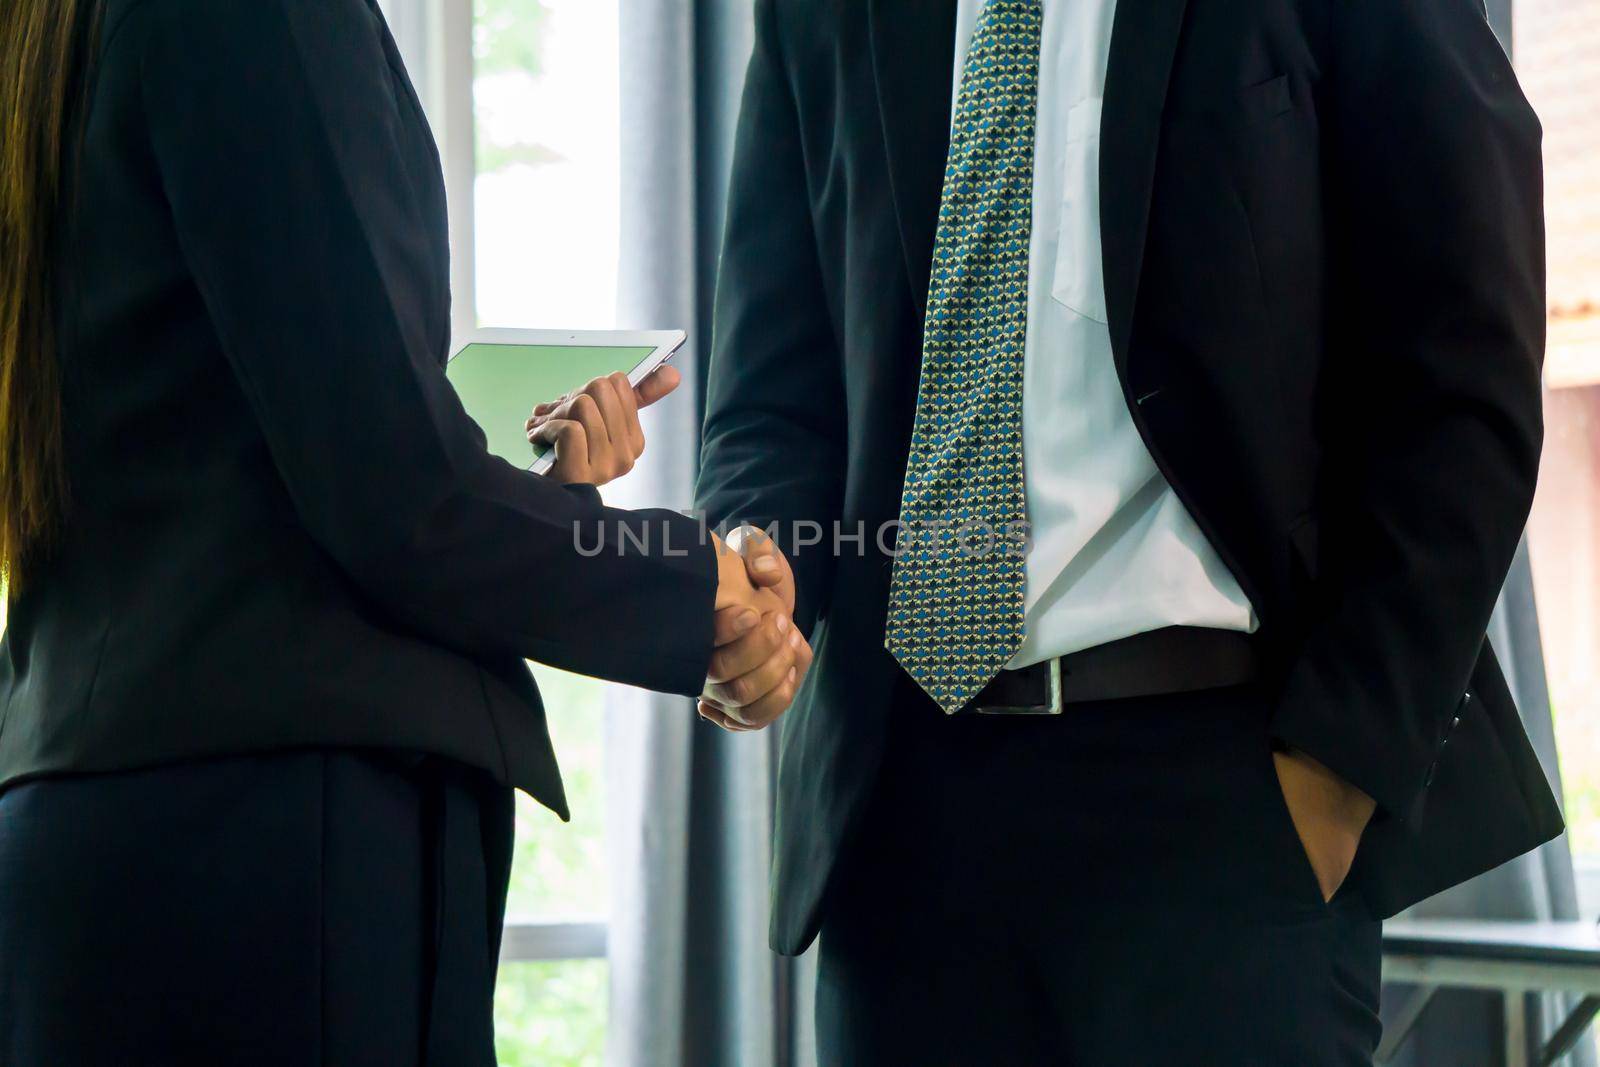 Business people shaking hands, finishing up a papers signing. Meeting, contract and lawyer consulting concept.